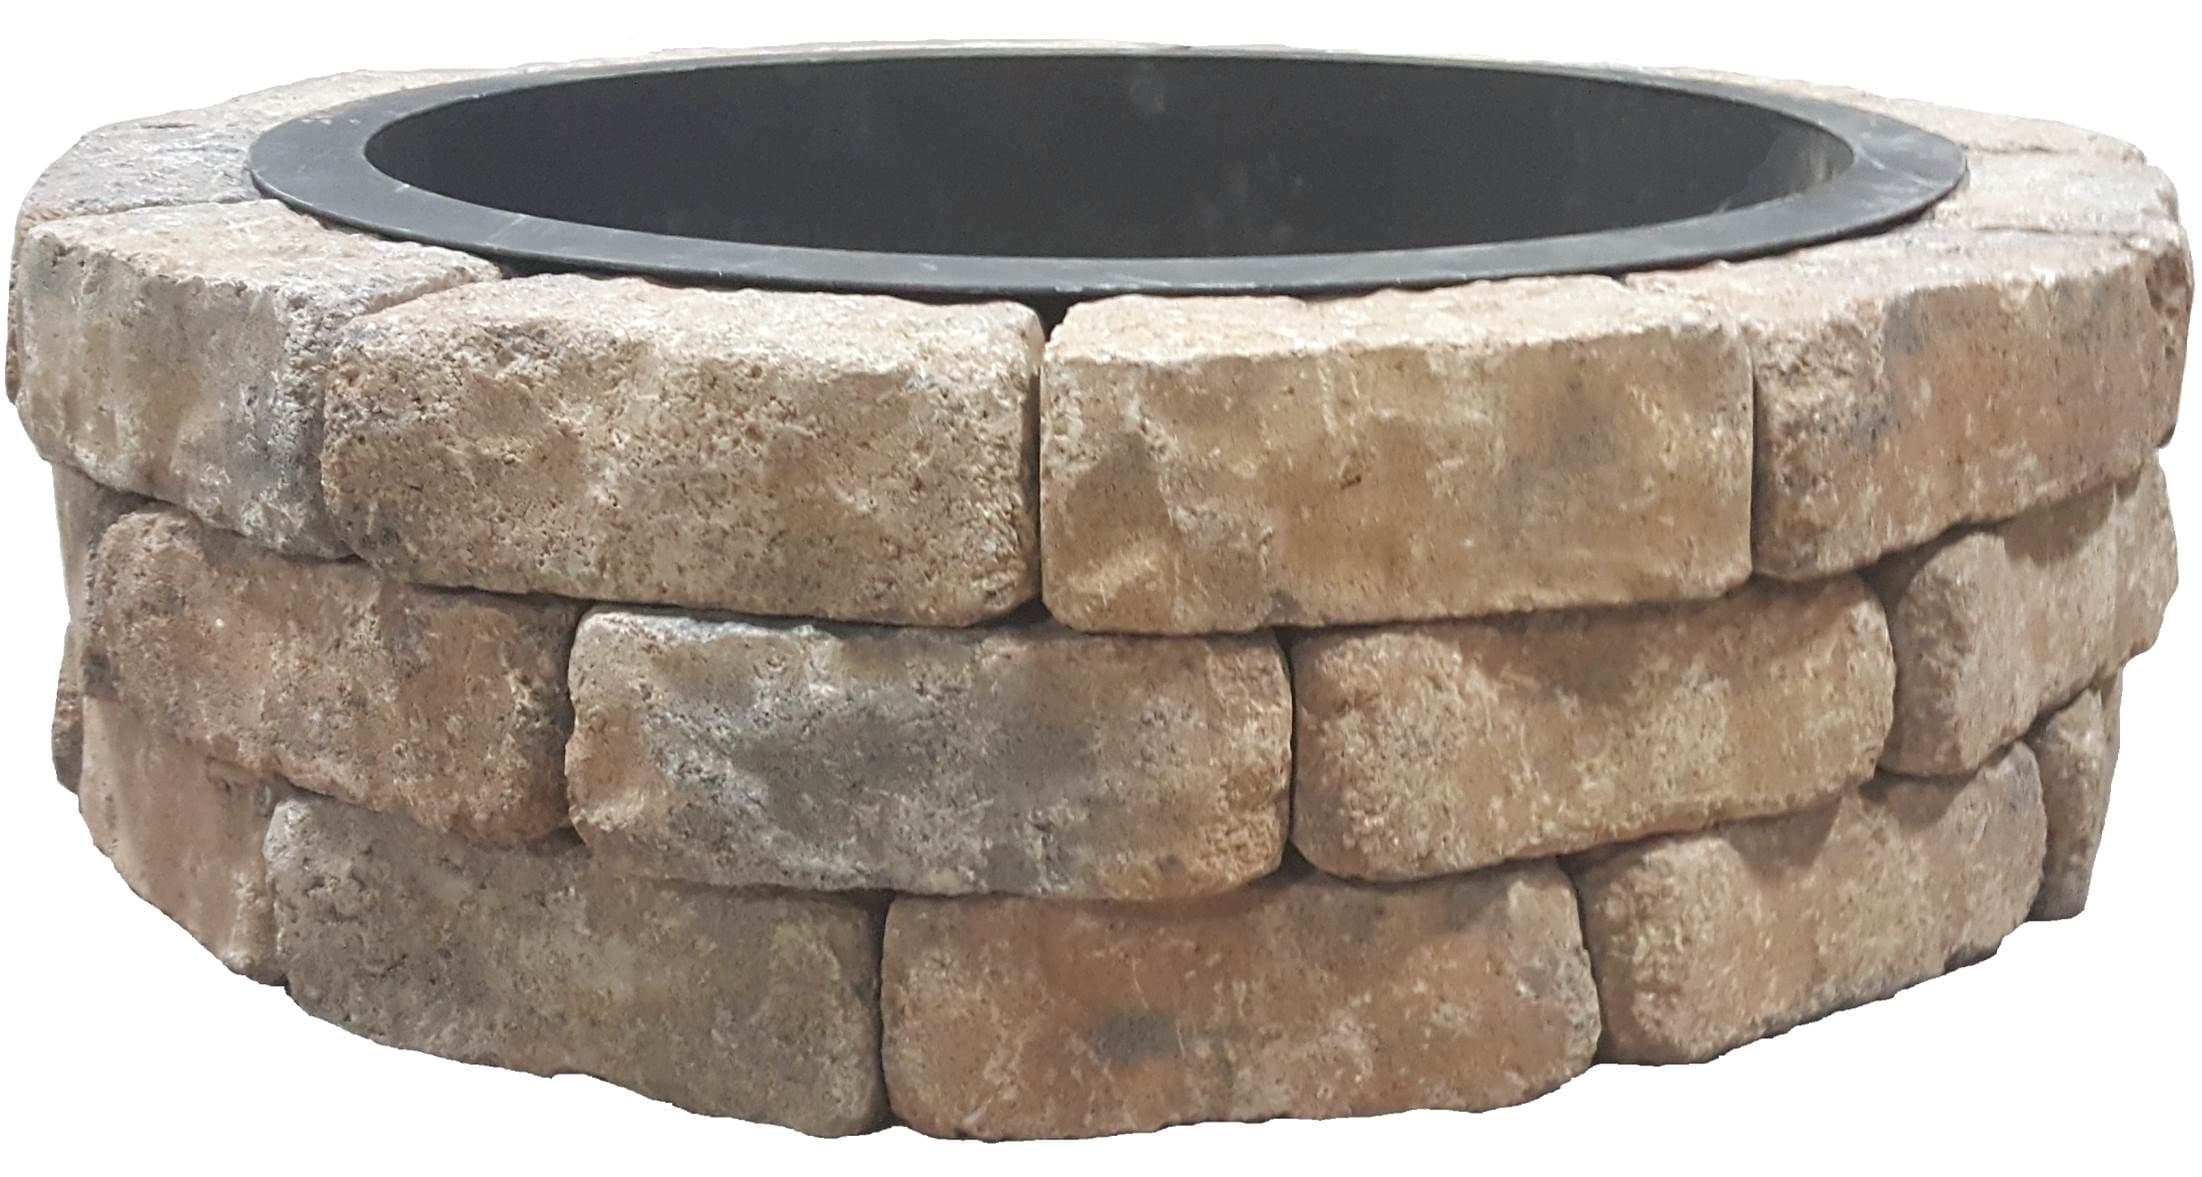 Fire Ring With Lip Smokeless Fire Pit Customized Design Pit Firepit Outdoor  Fire Place Gift for Camper Campground - Etsy